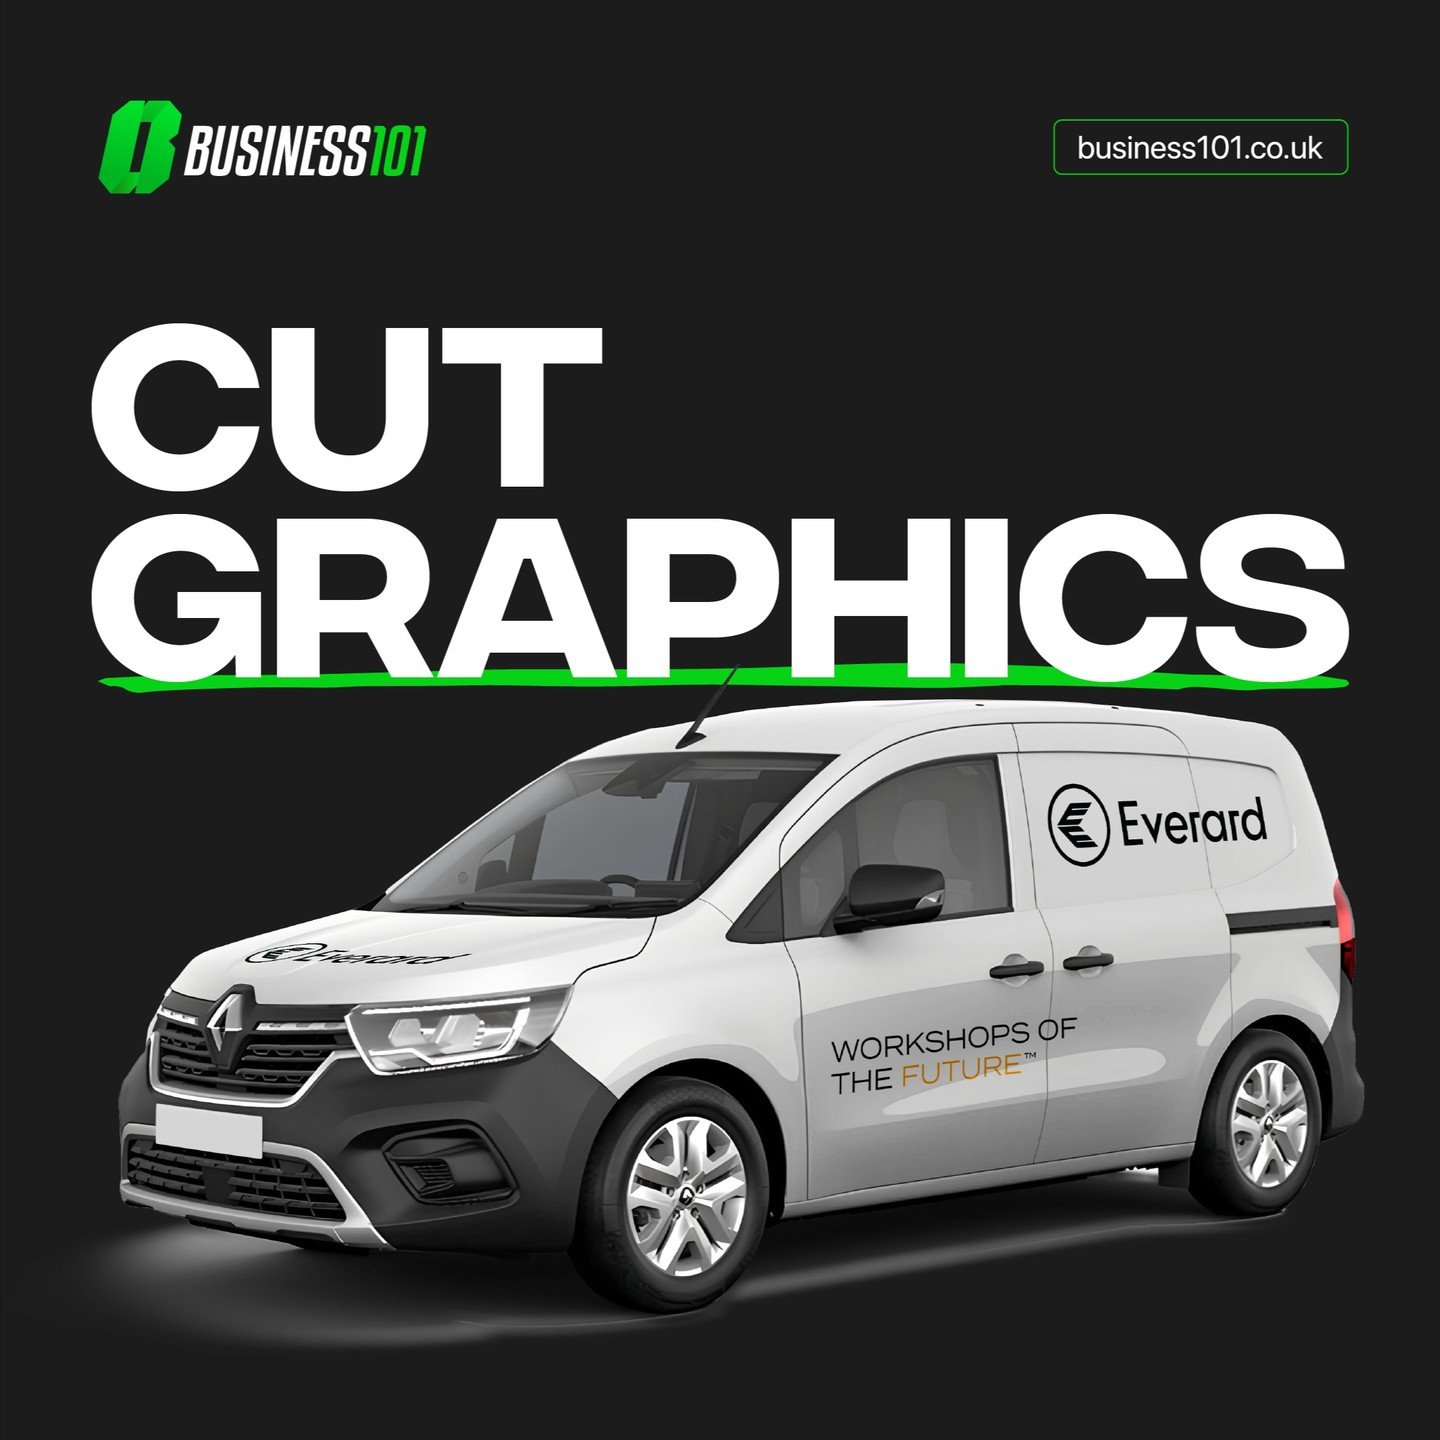 We have a range of vehicle livery solutions tailored to suit your budget 💰

Our Cut Graphics options begin at just &pound;200 + VAT, providing an affordable yet effective choice 💷

If you're ready to customise your vehicle, feel free to drop us an 